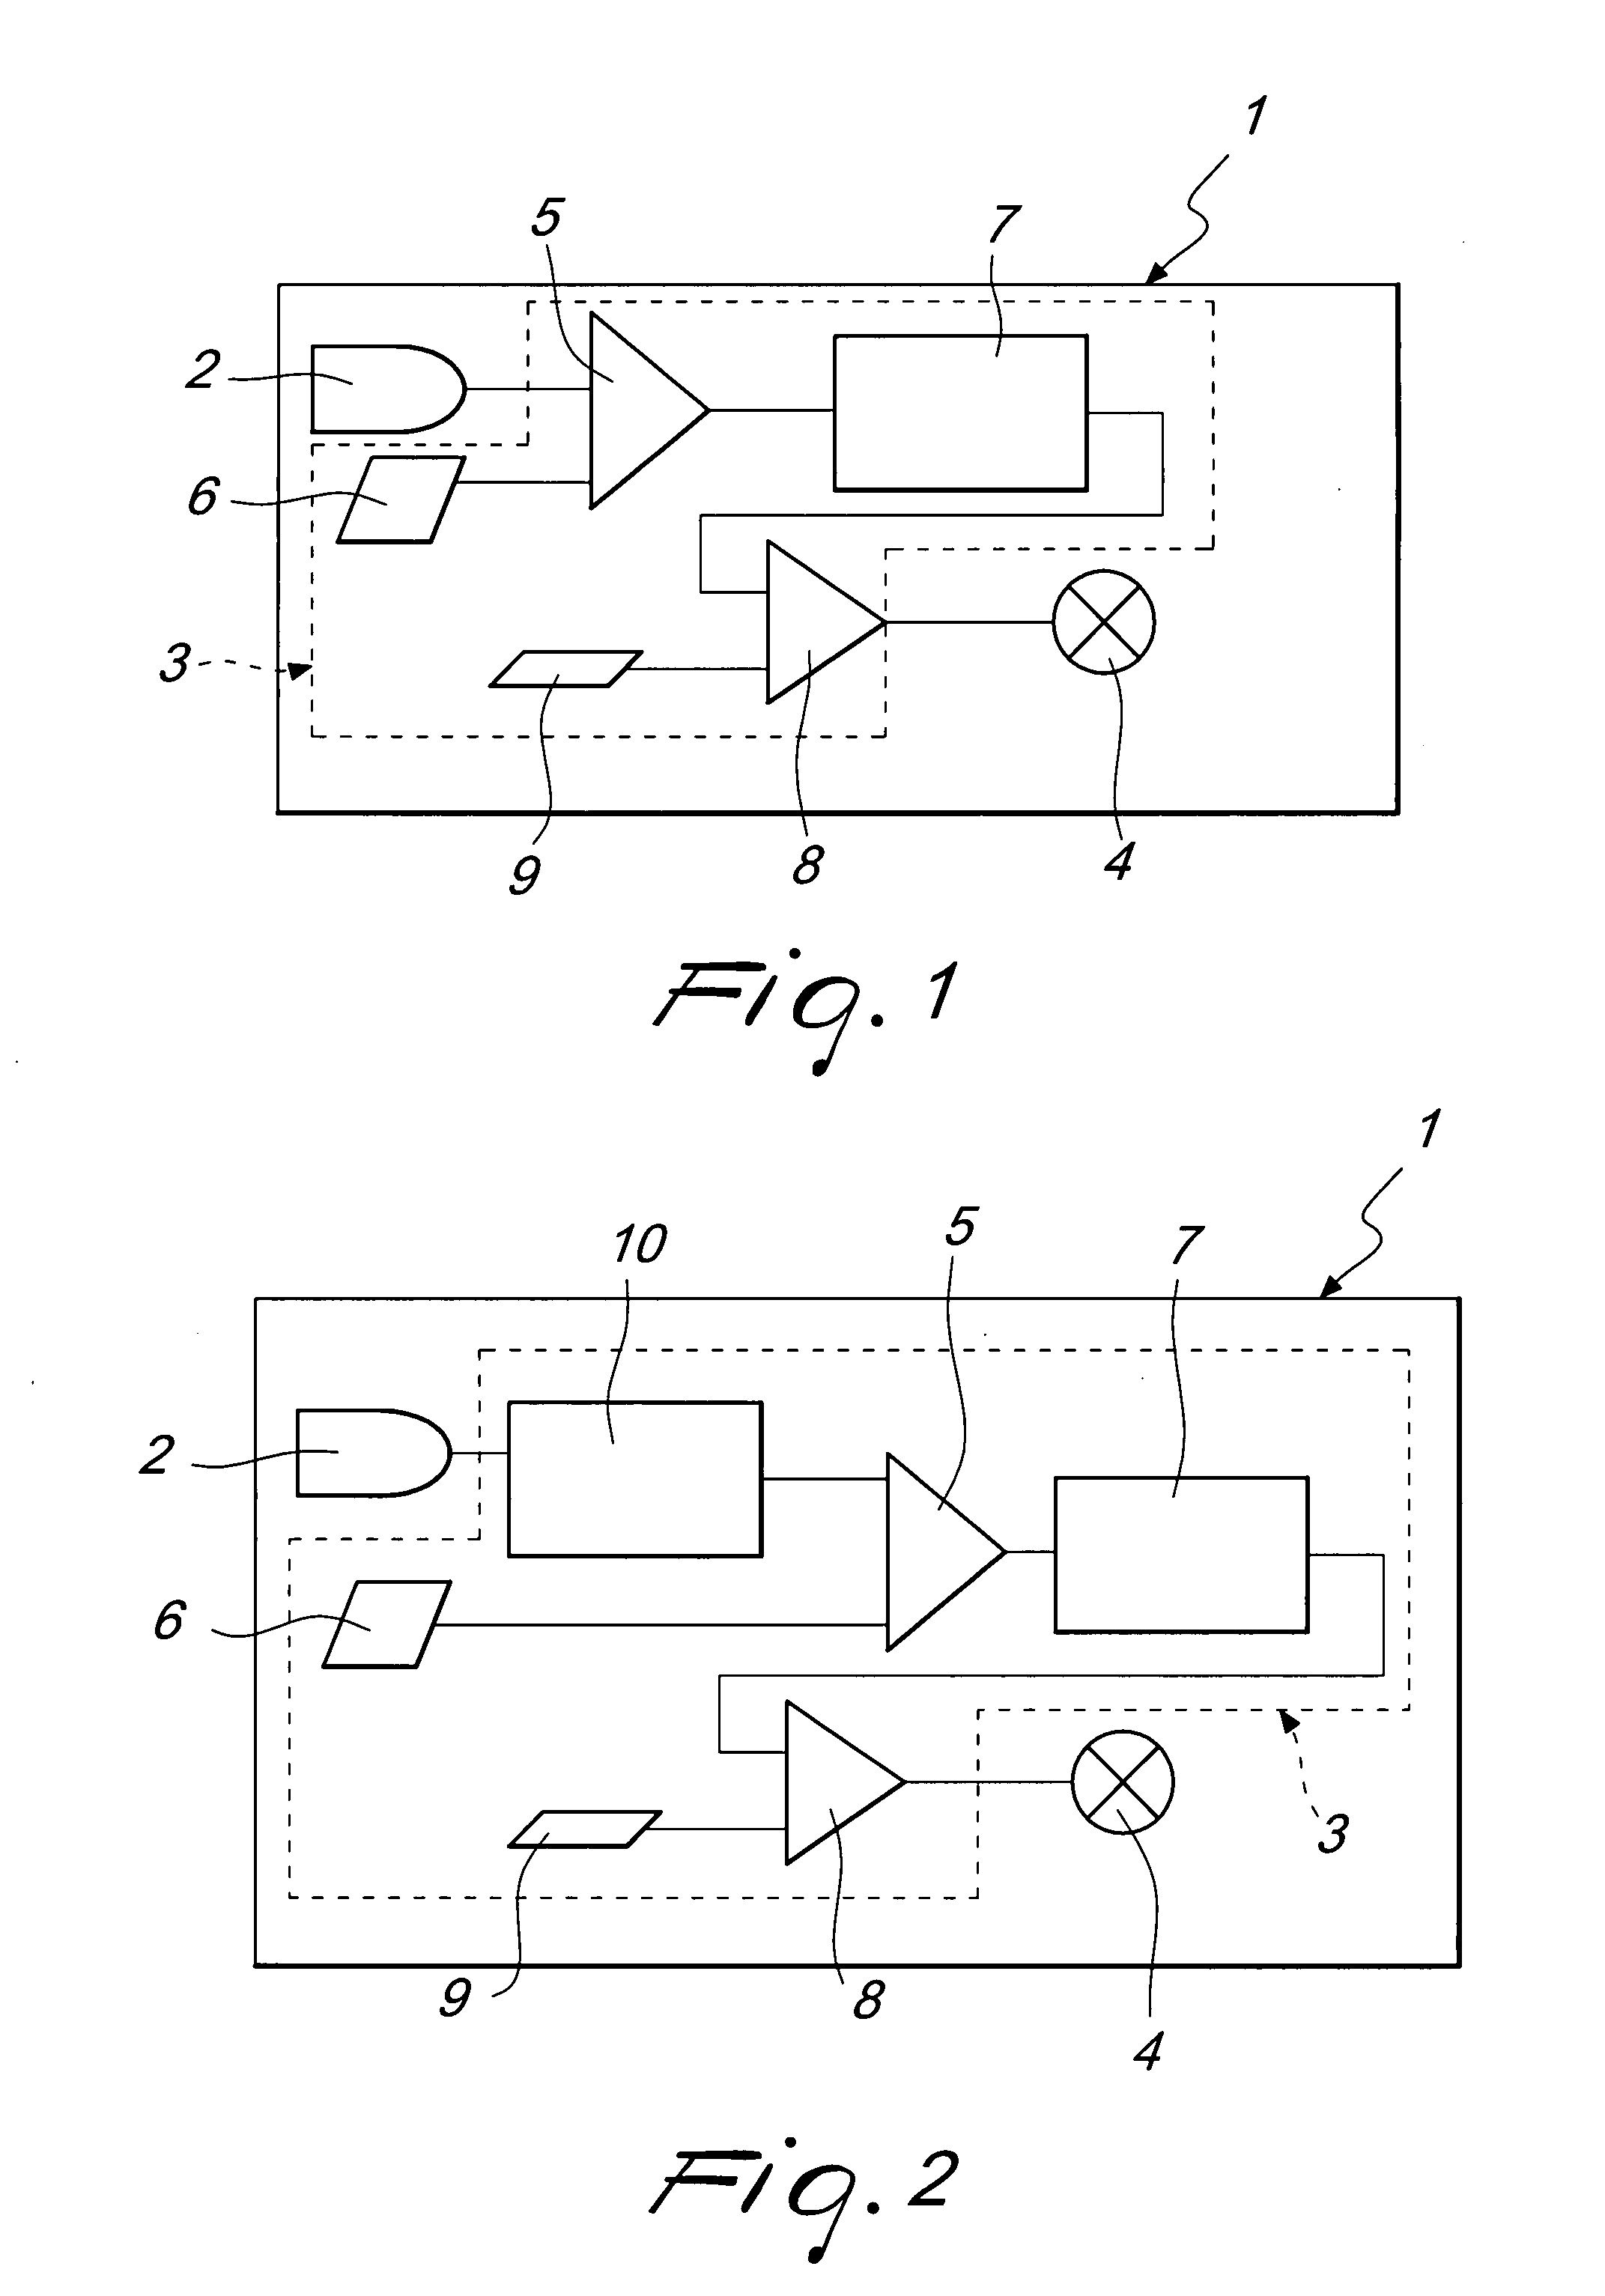 Method for detecting and reporting leaks of fluid in distribution networks, particularly in condominium water or gas distribution networks, and apparatus for performing the method